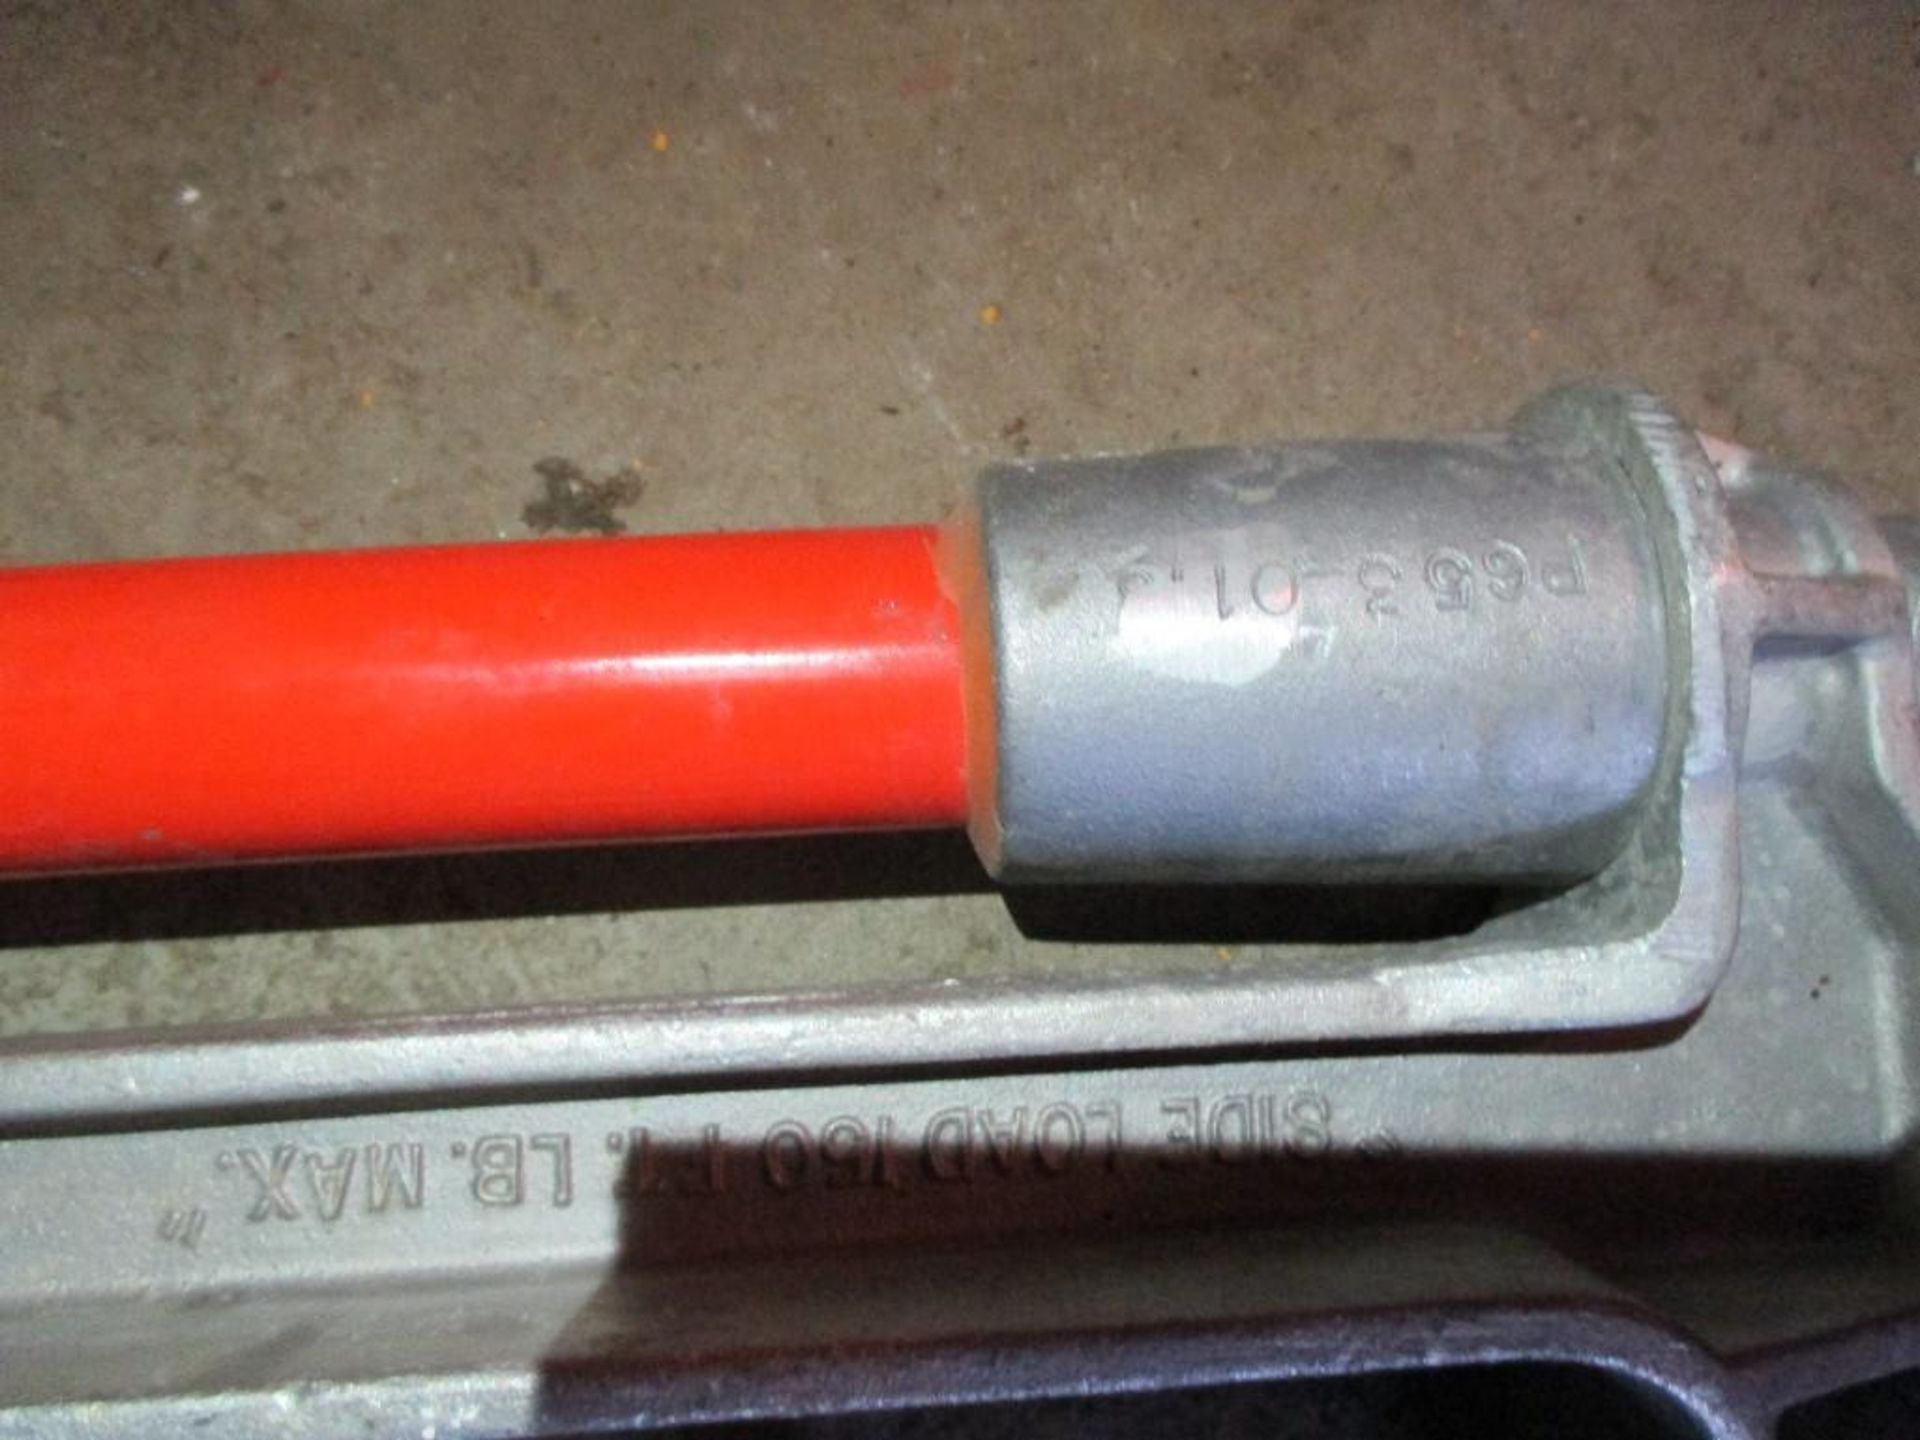 Insulated Temporary Wire Tong Hot Stick... All one money - Image 10 of 10